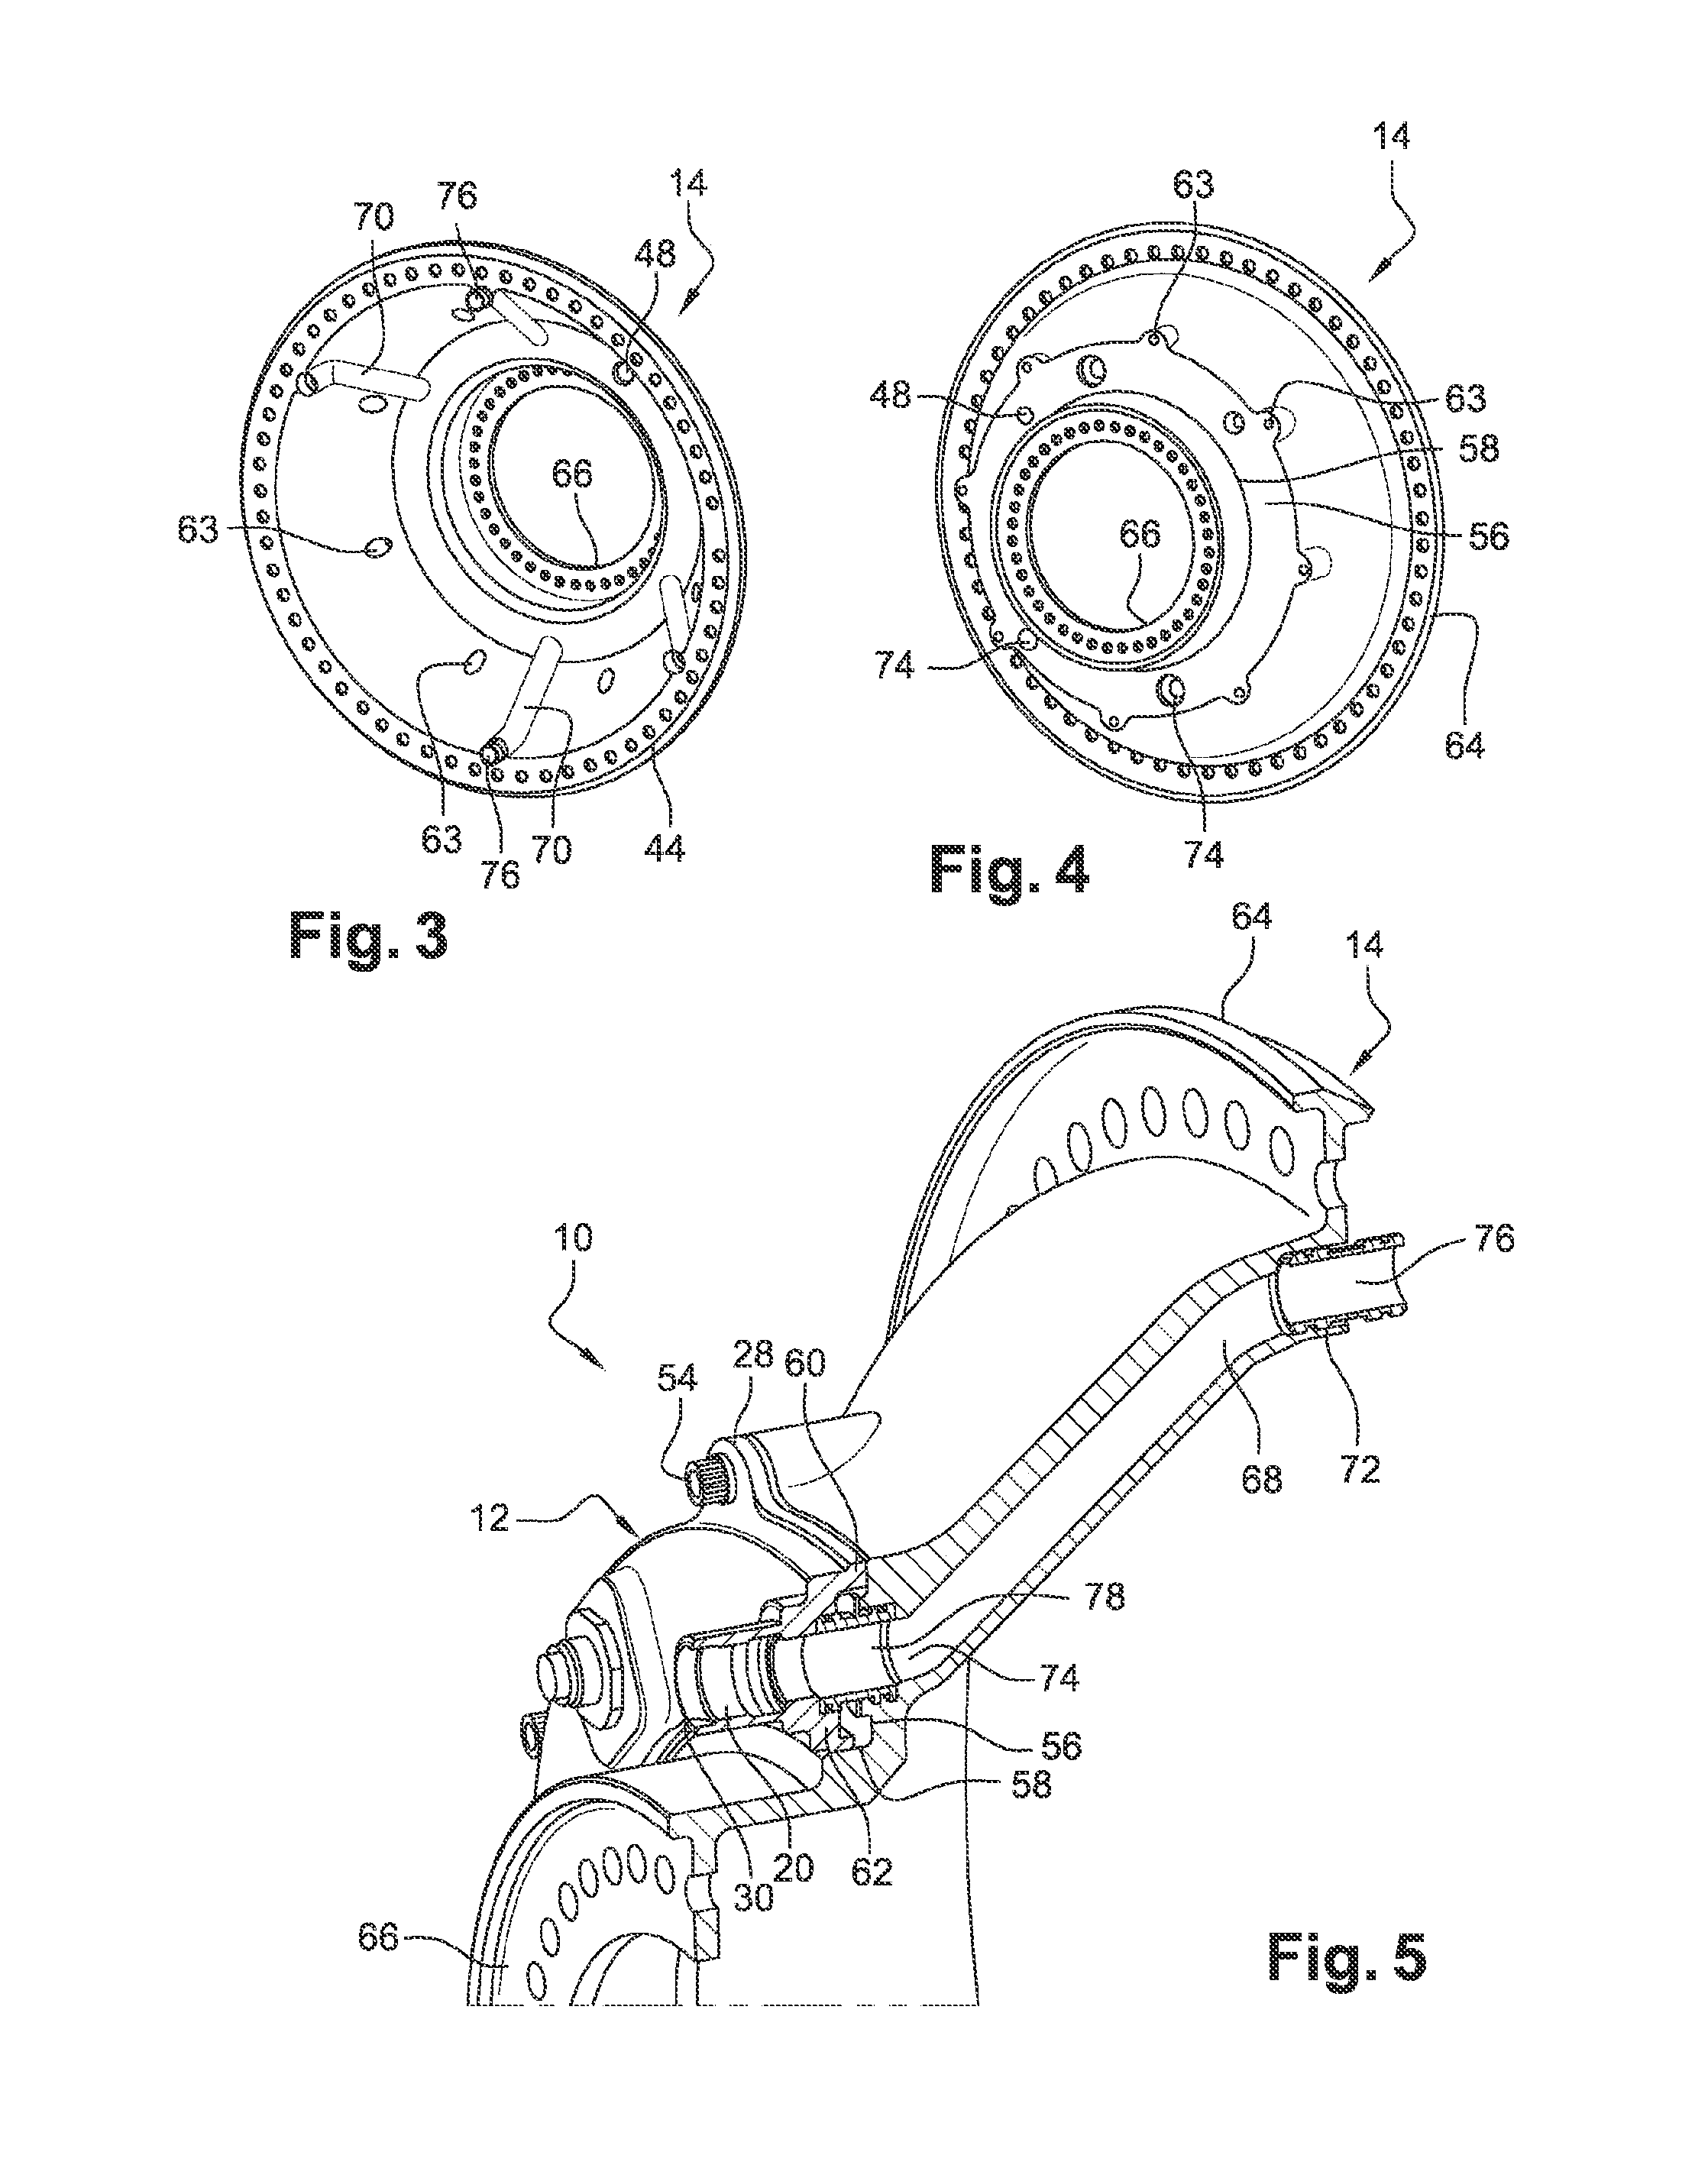 Hydraulic and electrical interface ring for a turbine engine